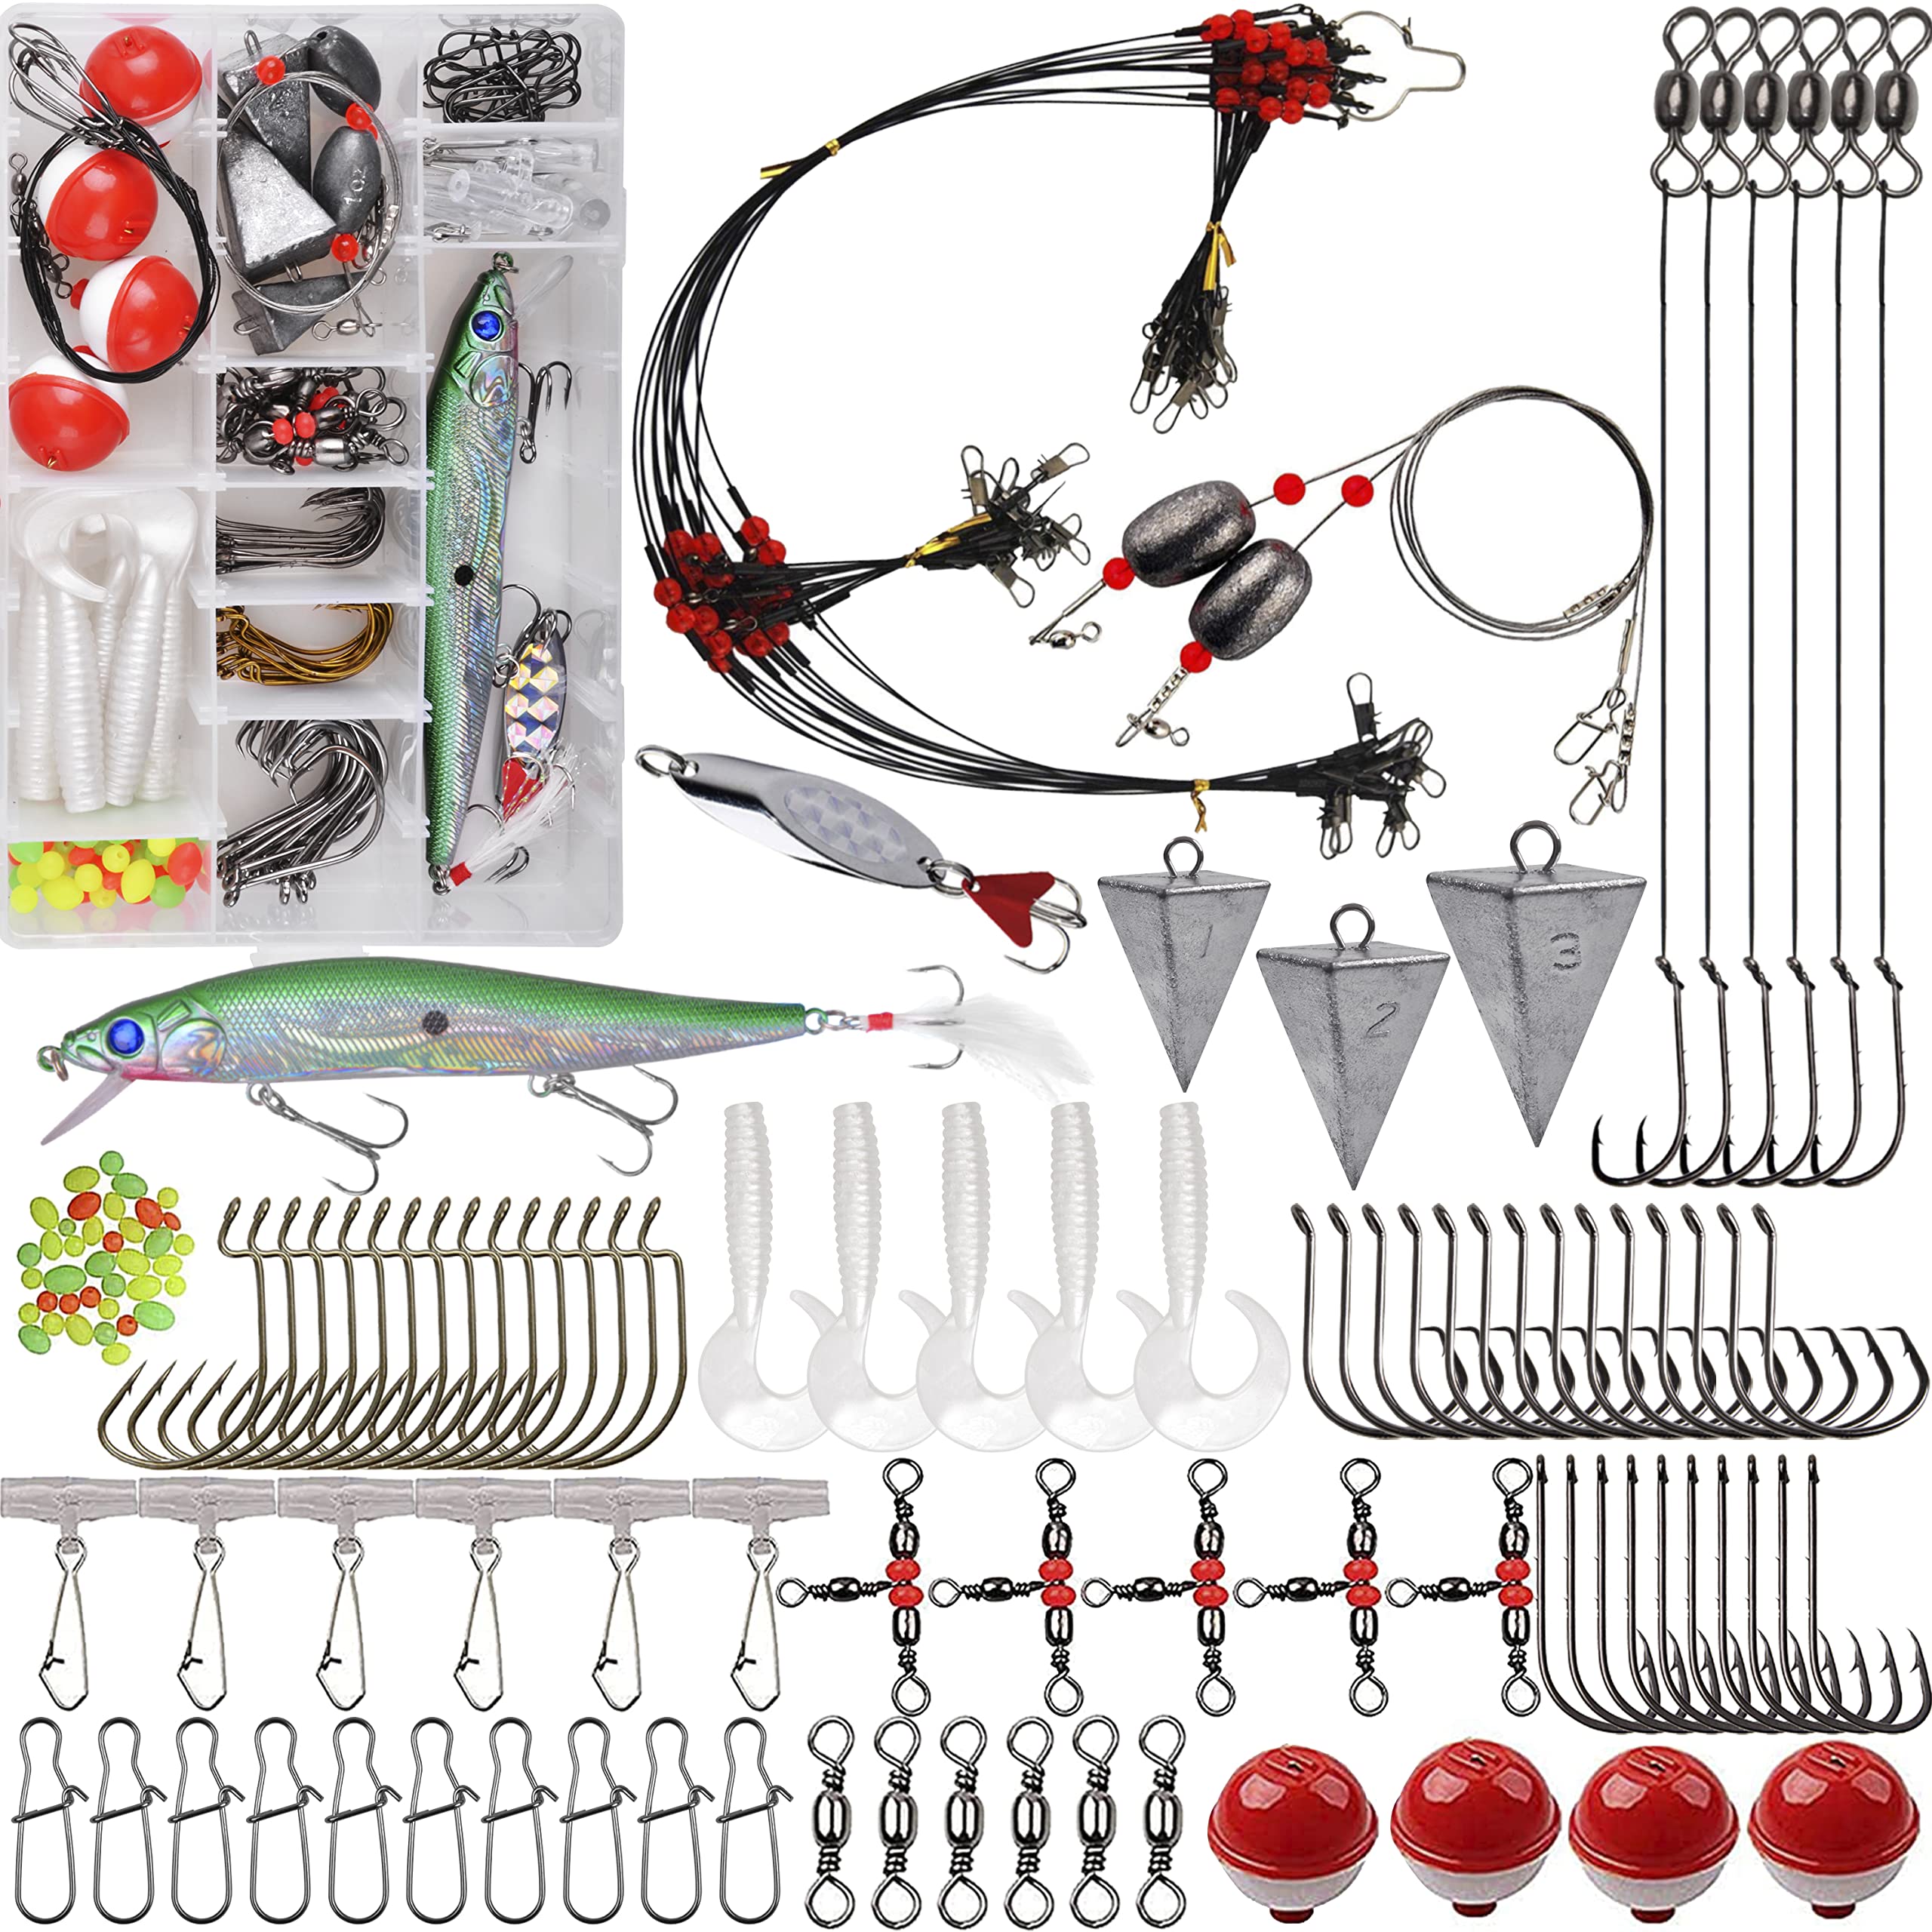 Saltwater Fishing Surf Fishing Rigs Tackle Kit - 138pcs Include Pyramid  Sinkers Saltwater Fishing Lures Hooks Leaders